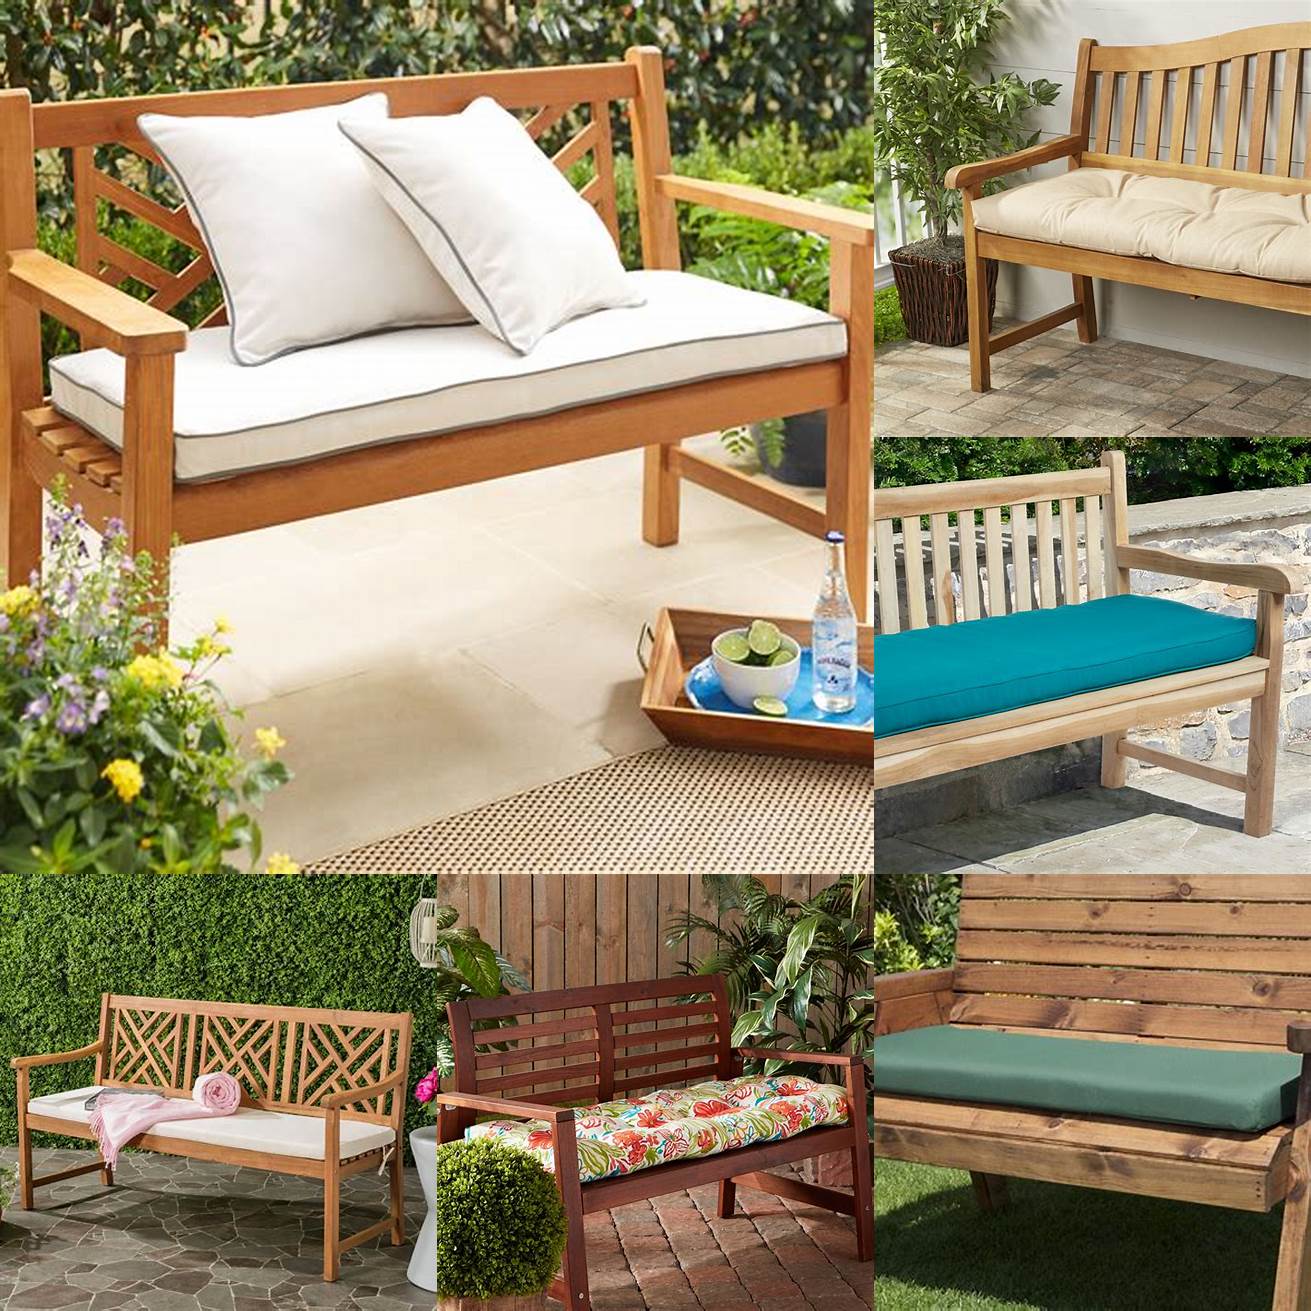 Wooden bench with outdoor pillows